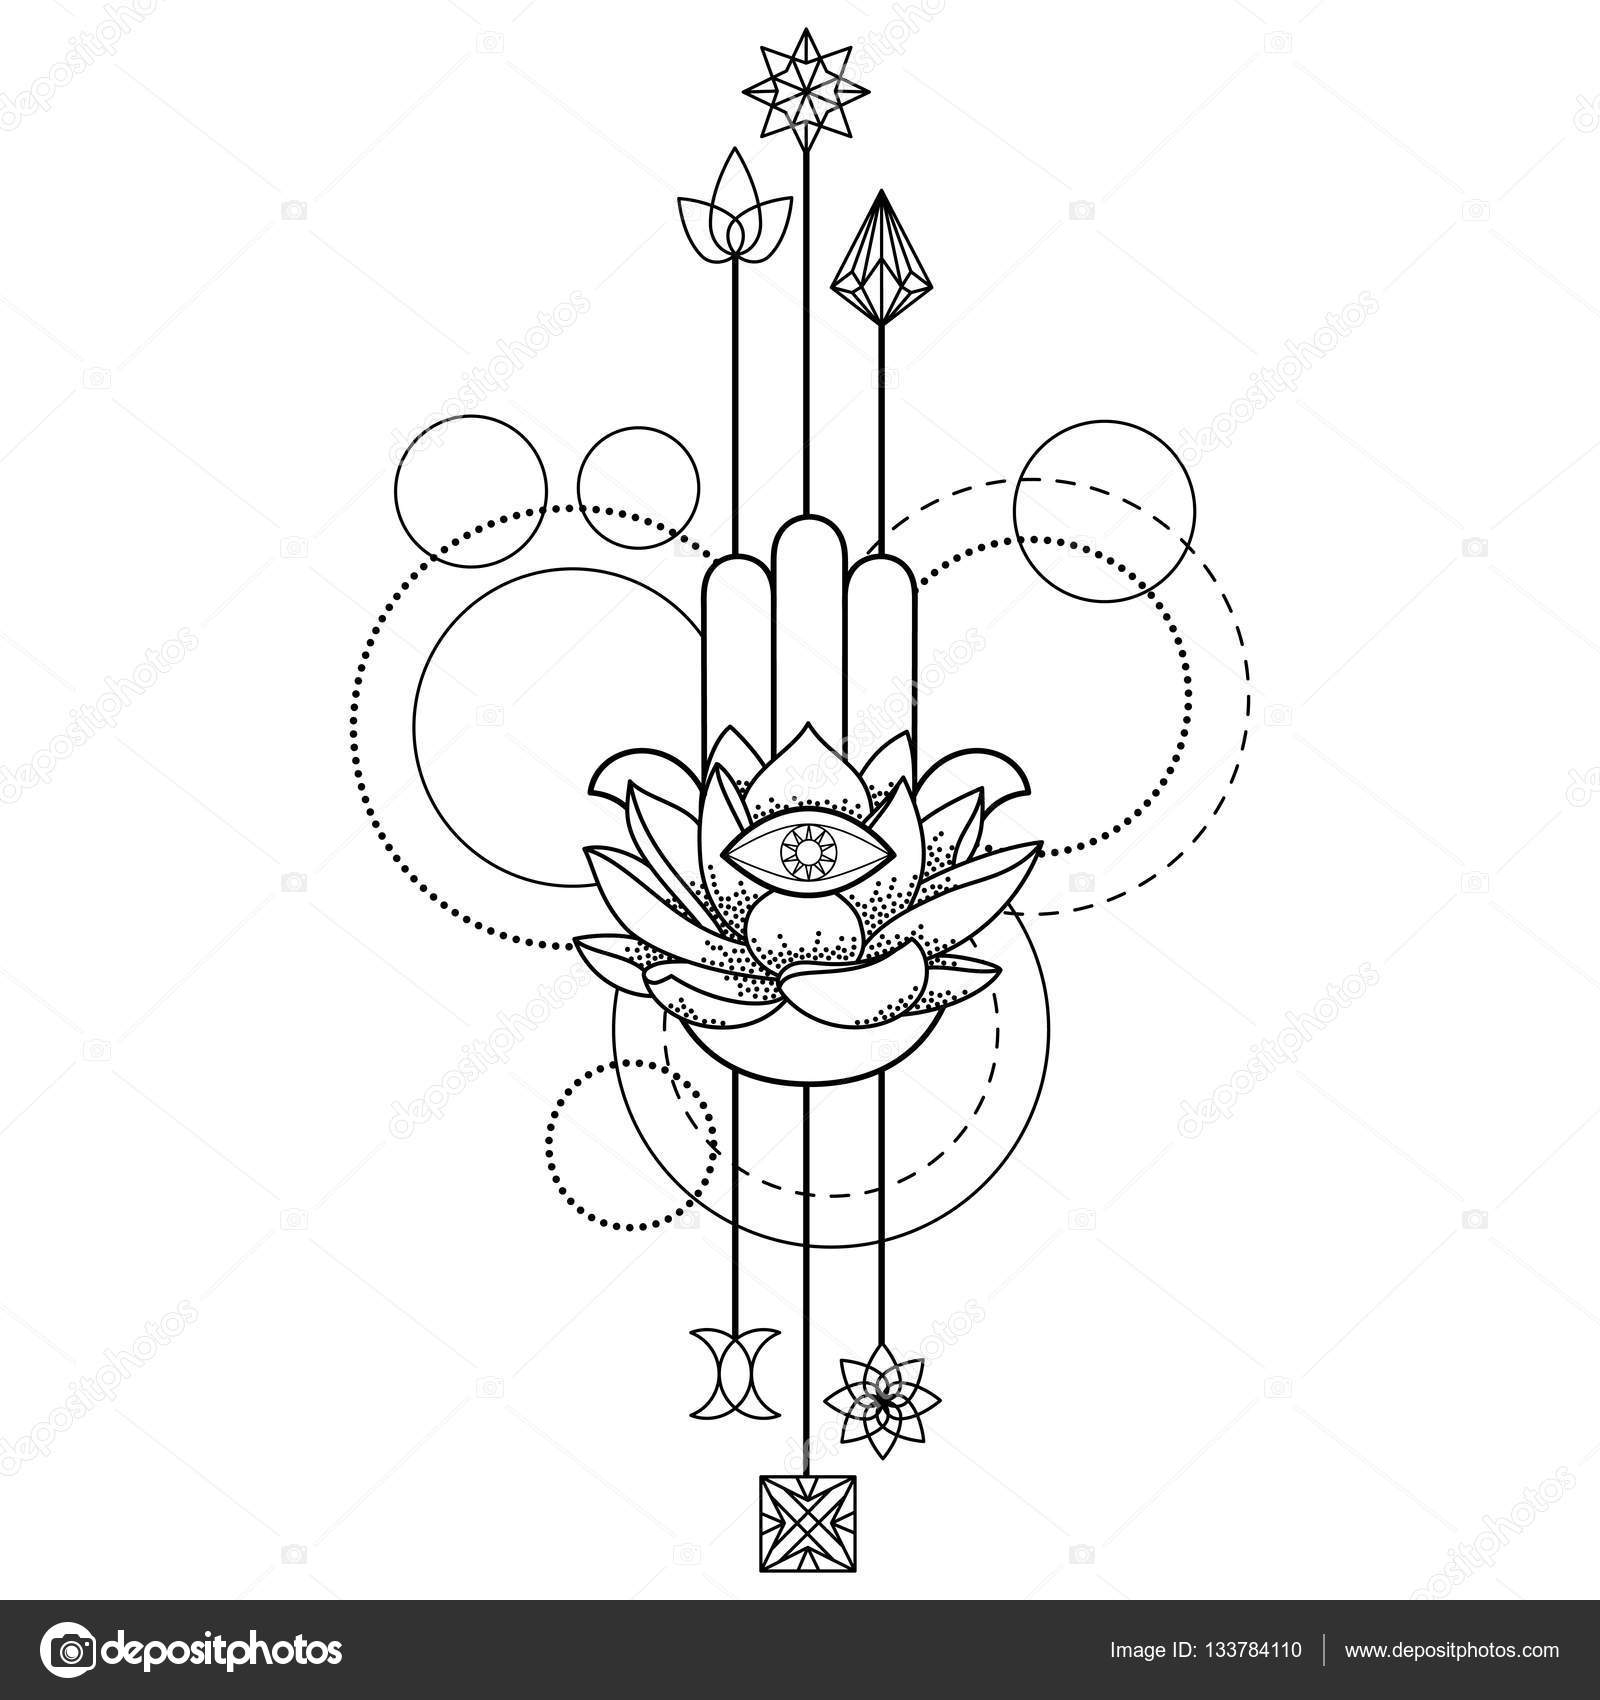 Top 15 Exclusive Hamsa Tattoo Designs In 2023  Styles At Life